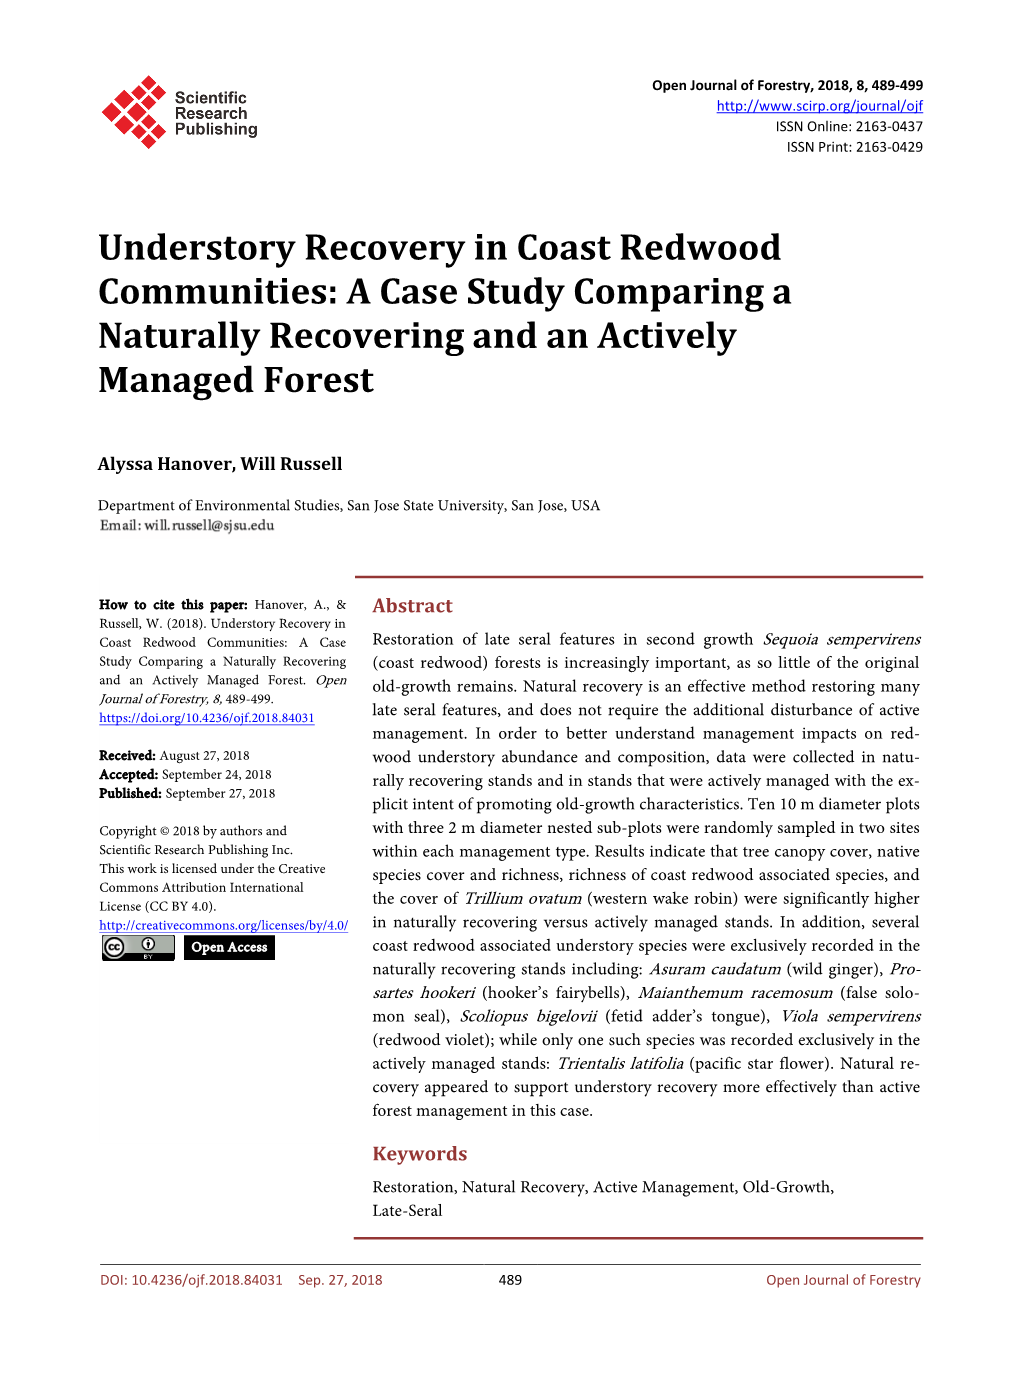 Understory Recovery in Coast Redwood Communities: a Case Study Comparing a Naturally Recovering and an Actively Managed Forest